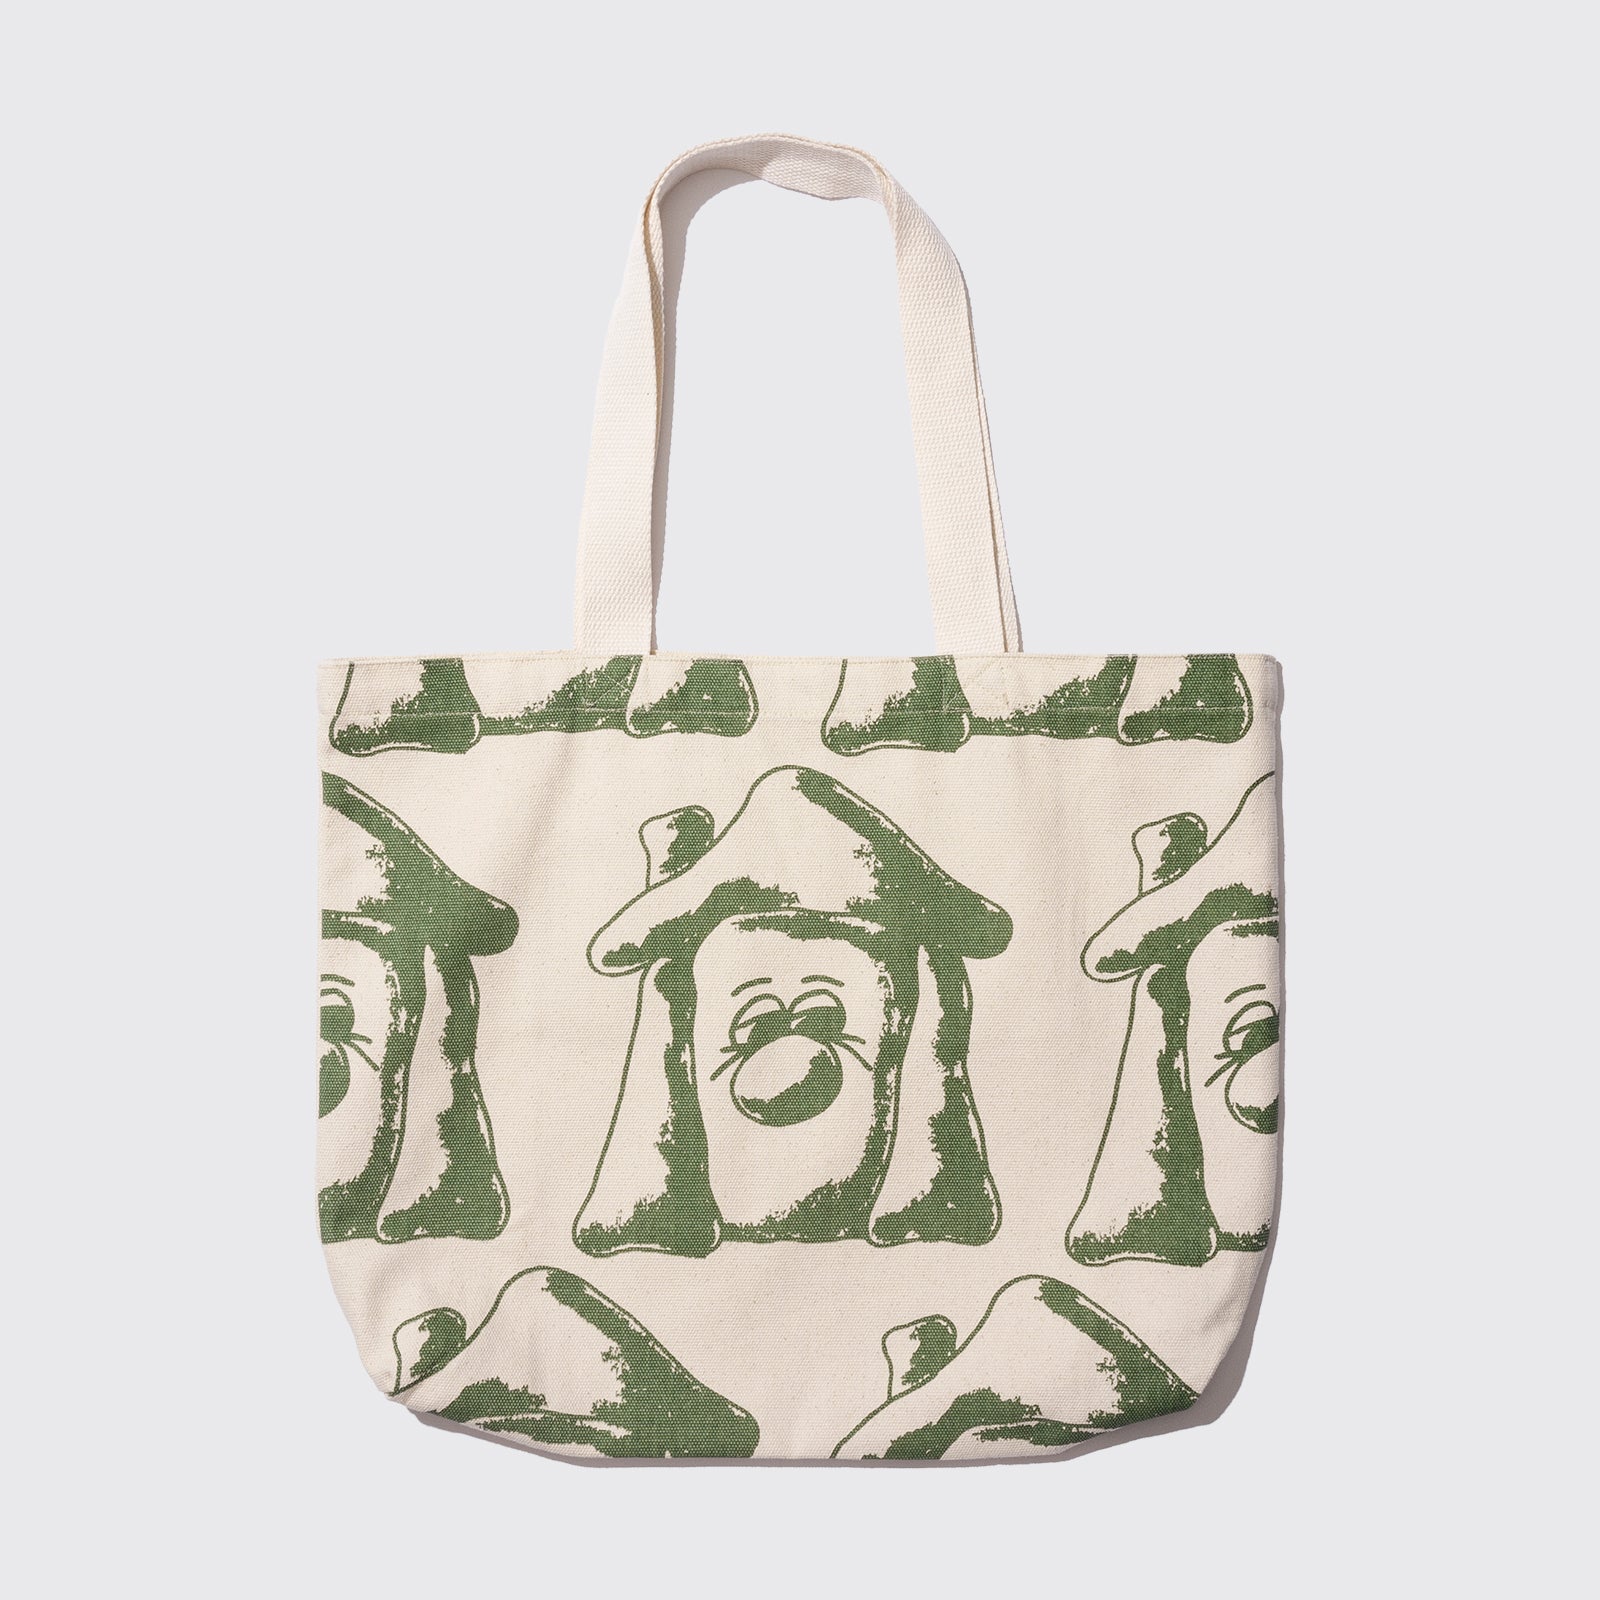 The House Tote Bag